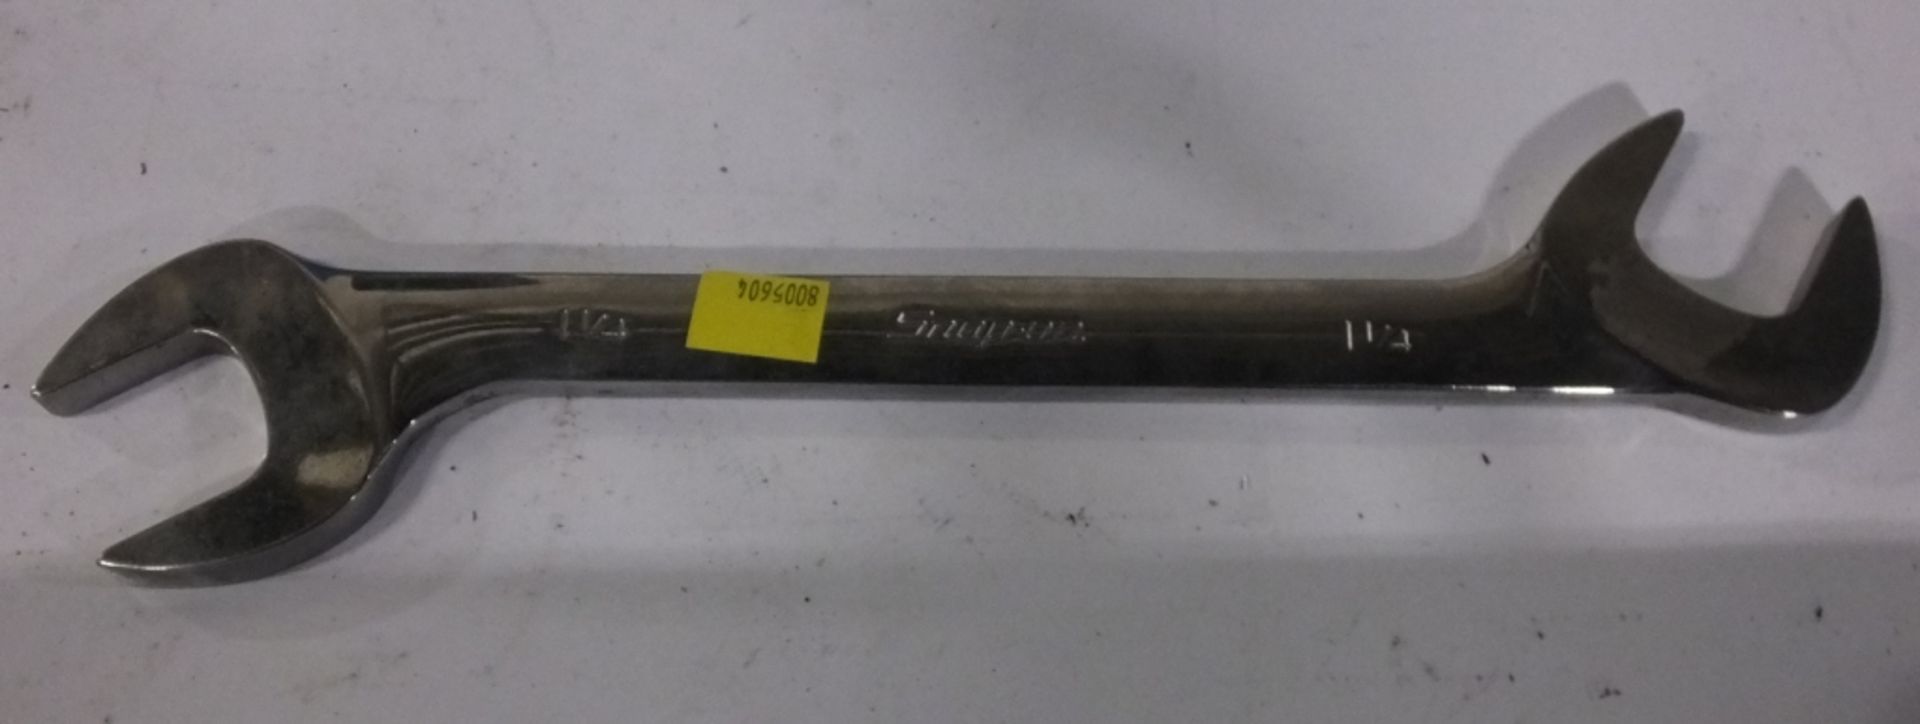 Snap-On spanner - 1 1/4